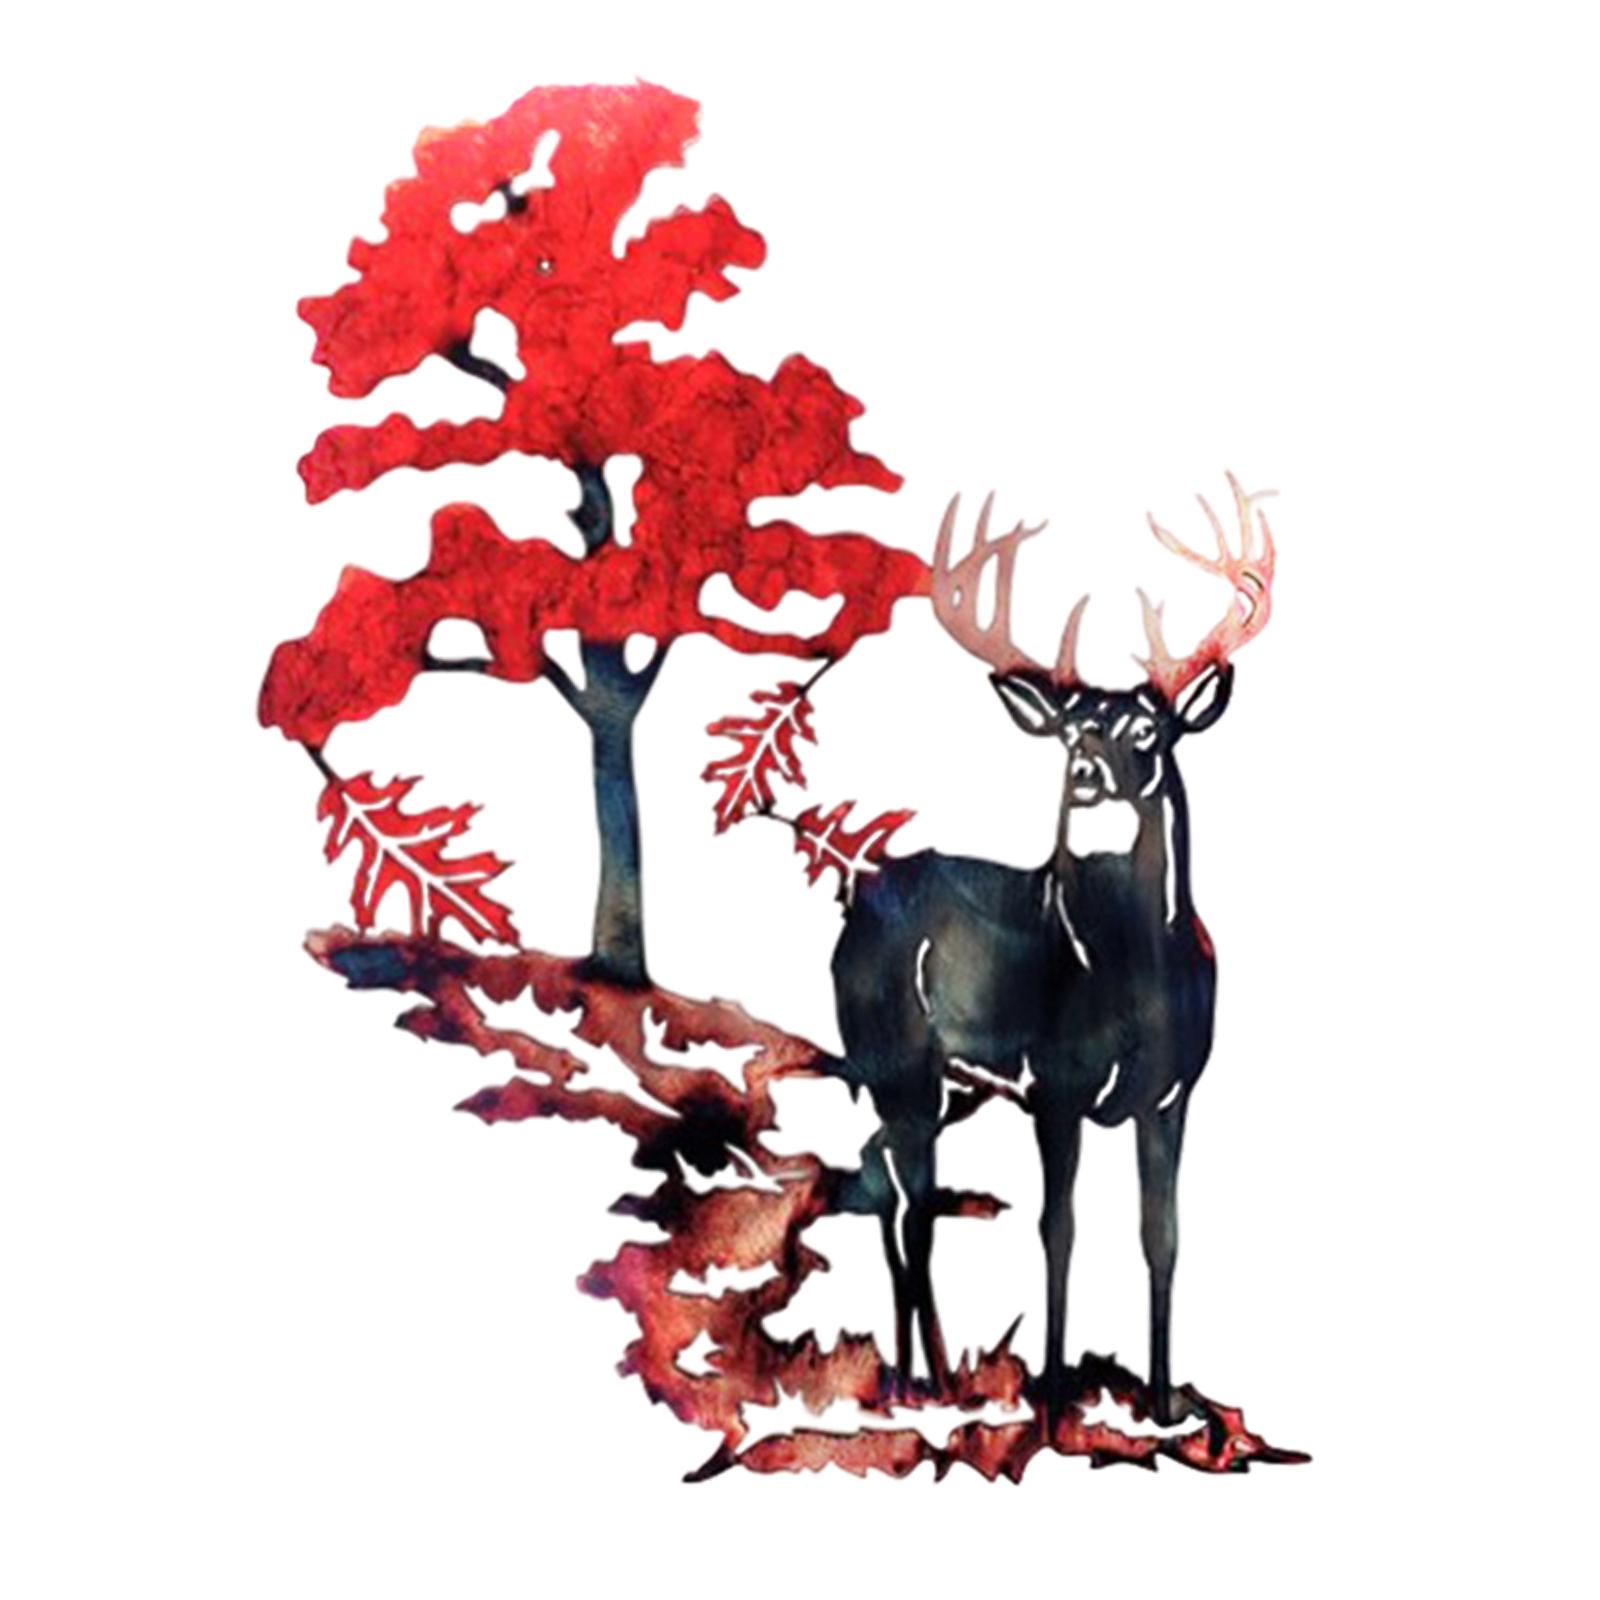 3D Silhouettes Wall Decor Deer Hollow Out Sculpture ing 33x35cm